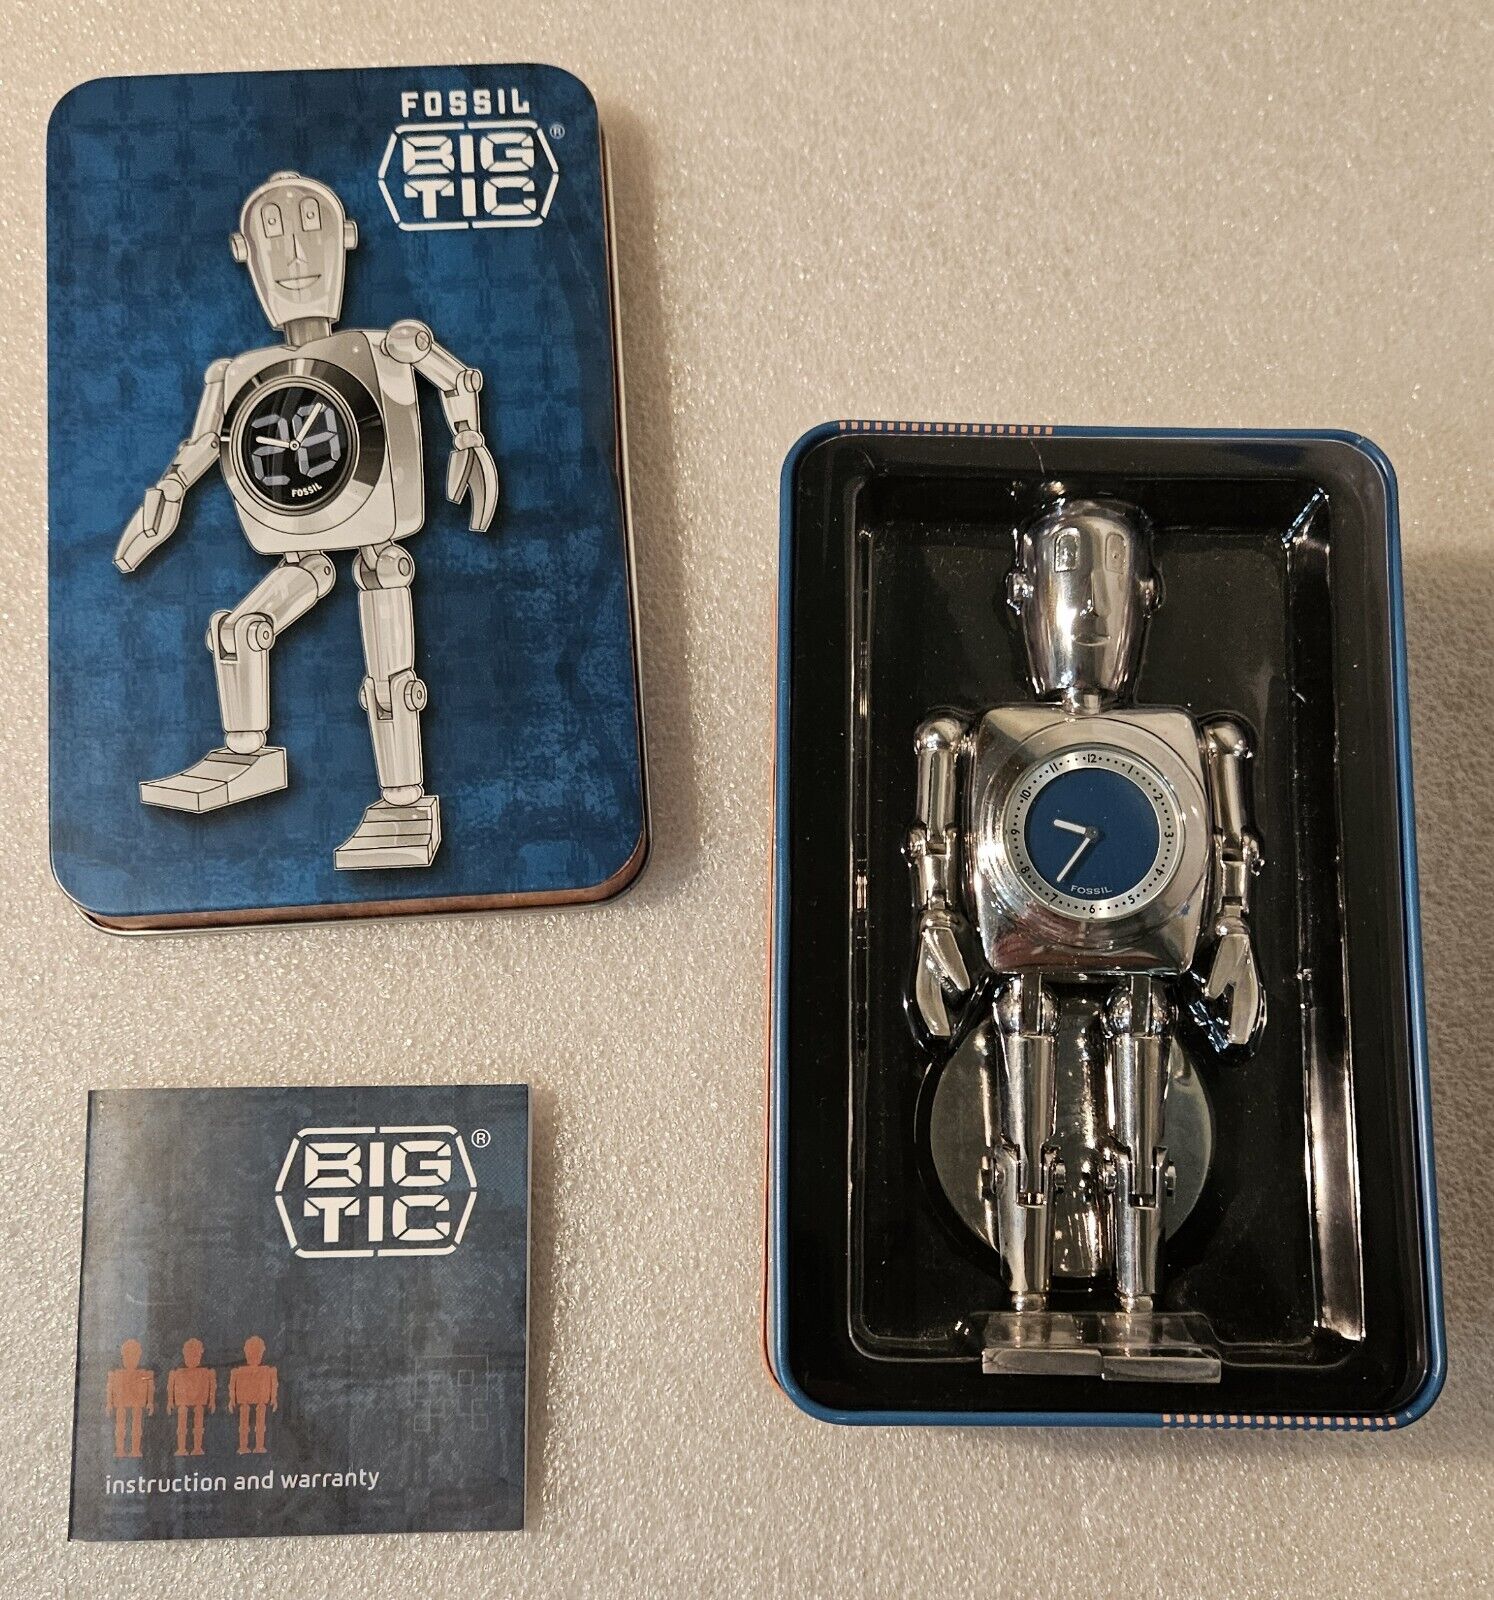 Fossil Robot Clock Watch  Big Tic - Brand new Limited Edition #287/588